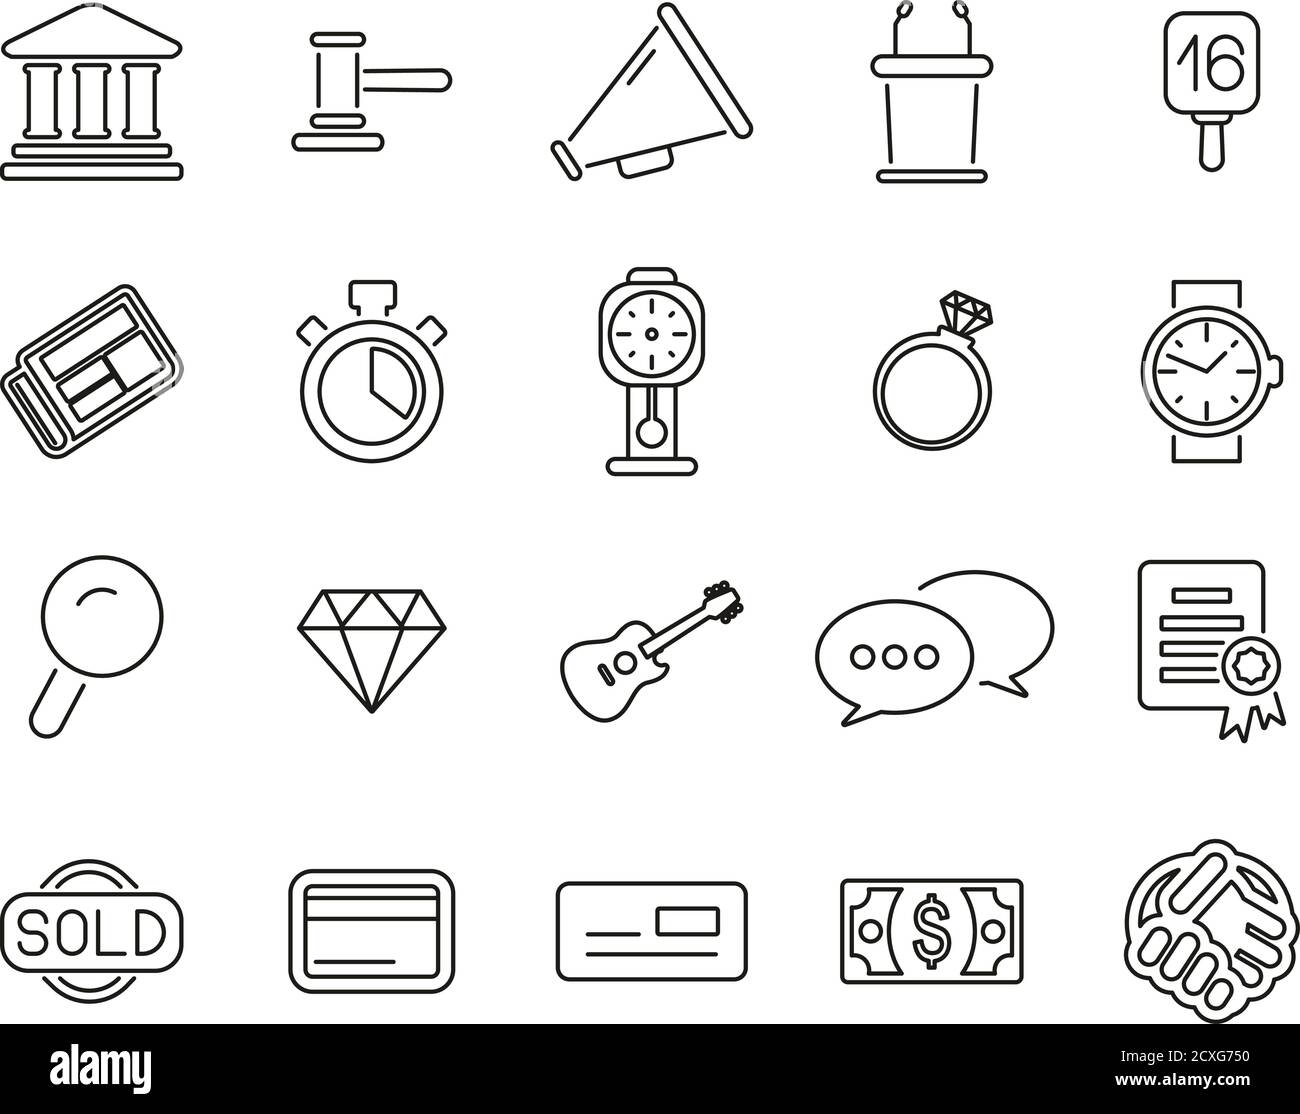 Auction Bid Card Stock Vector Images - Alamy For Auction Bid Cards Template